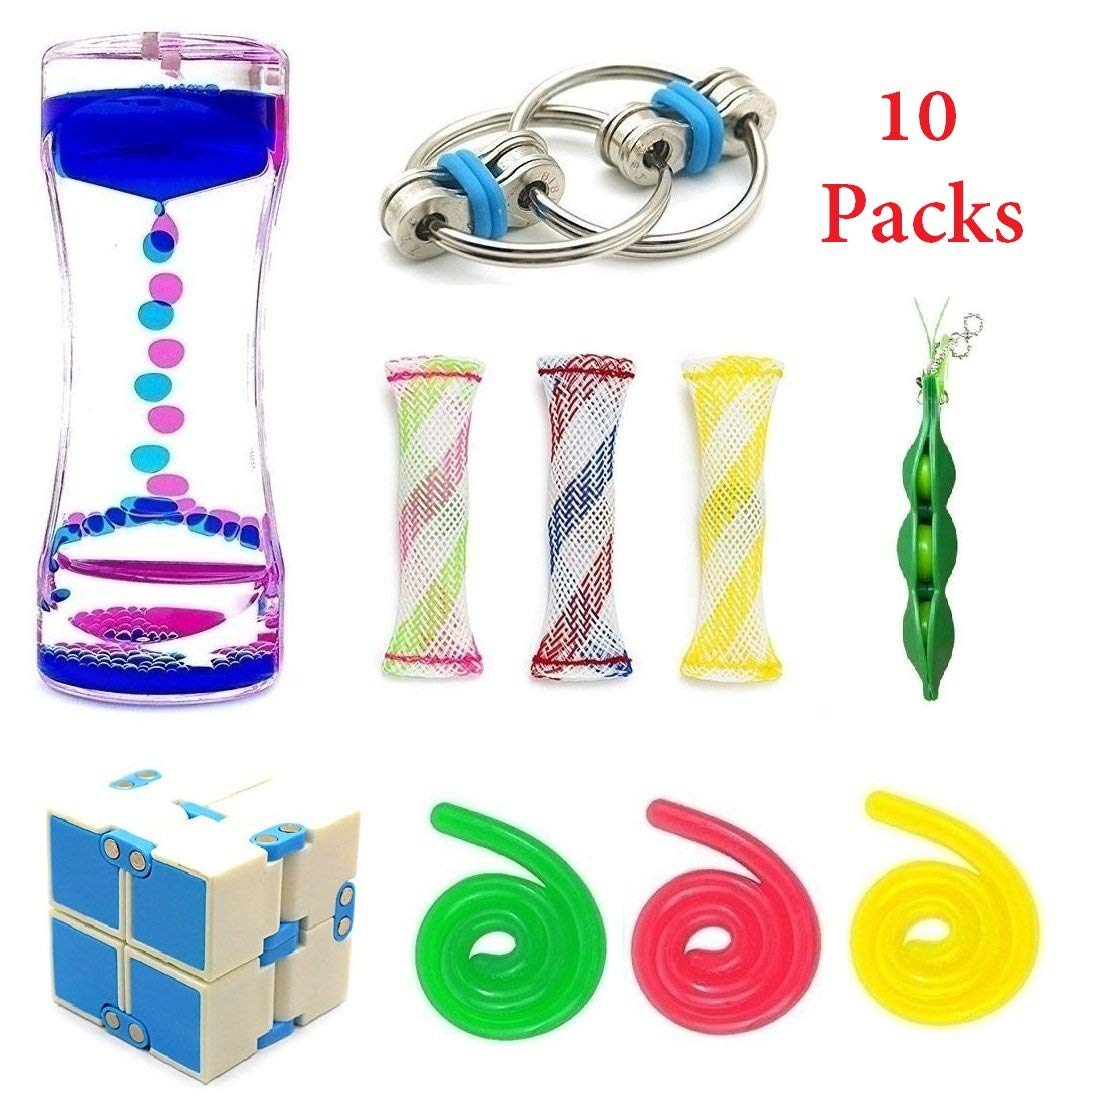 SpringFly 10pcs Sensory Toys Bundle-Liquid Motion Timer/Fidget Bike Chain/Squeeze Soybean/Stretchy Strings For ADD ADHD Stress Relief Fidget Toys